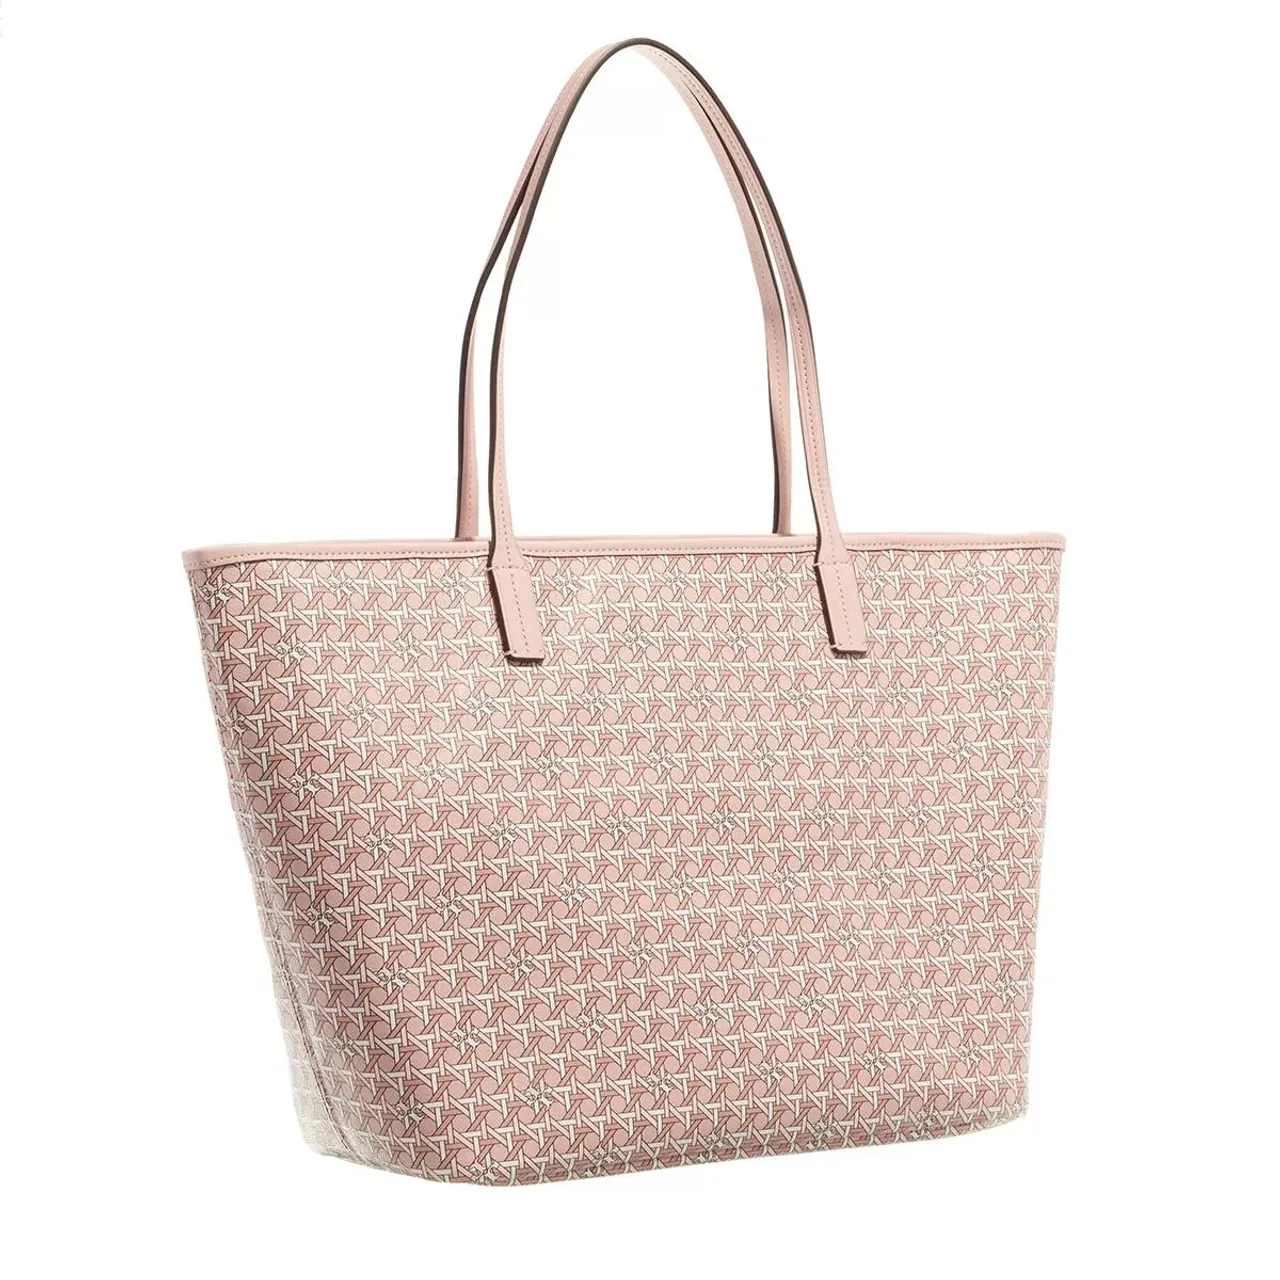 Tory Burch Tote Bags - Ever-Ready Tote - rose - Tote Bags for ladies